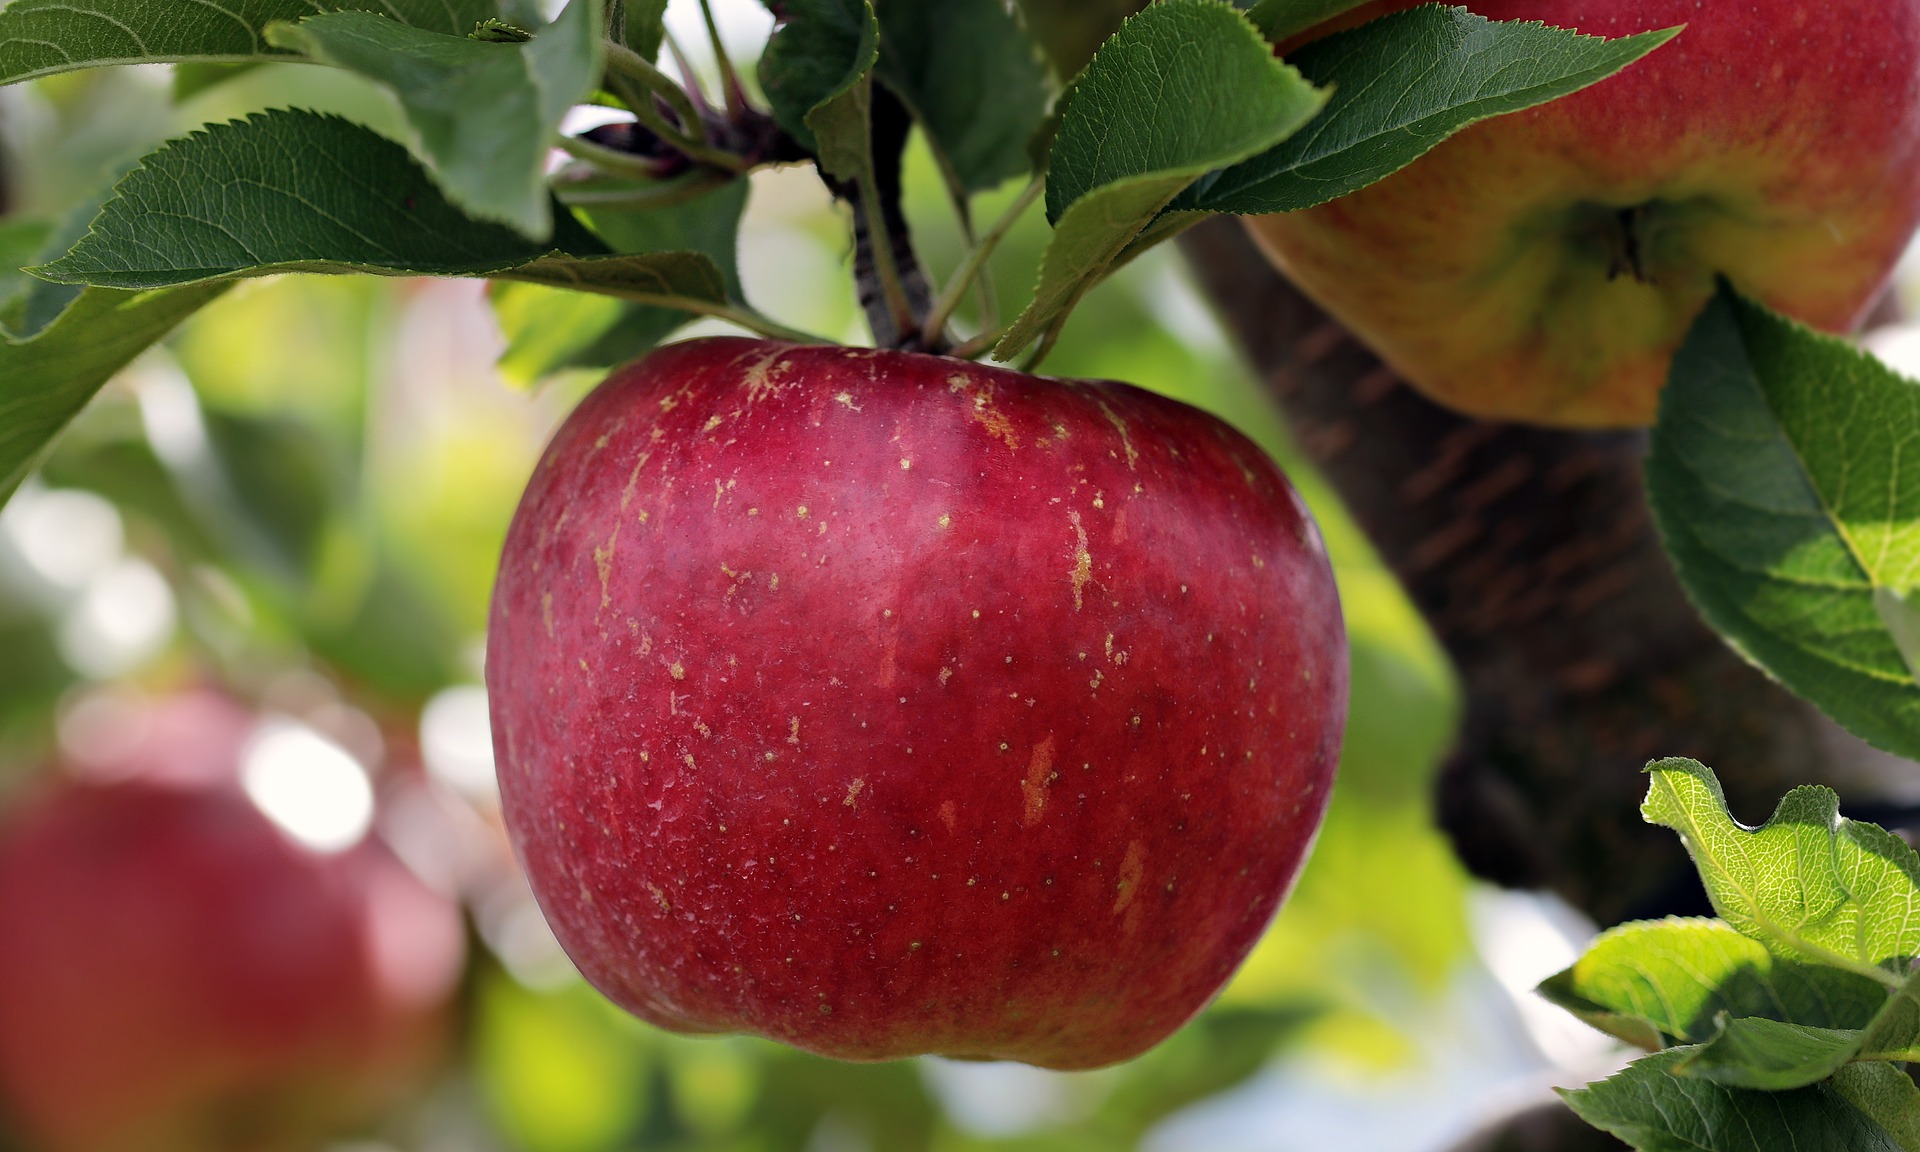 Are Apples Good For Your Immune System?